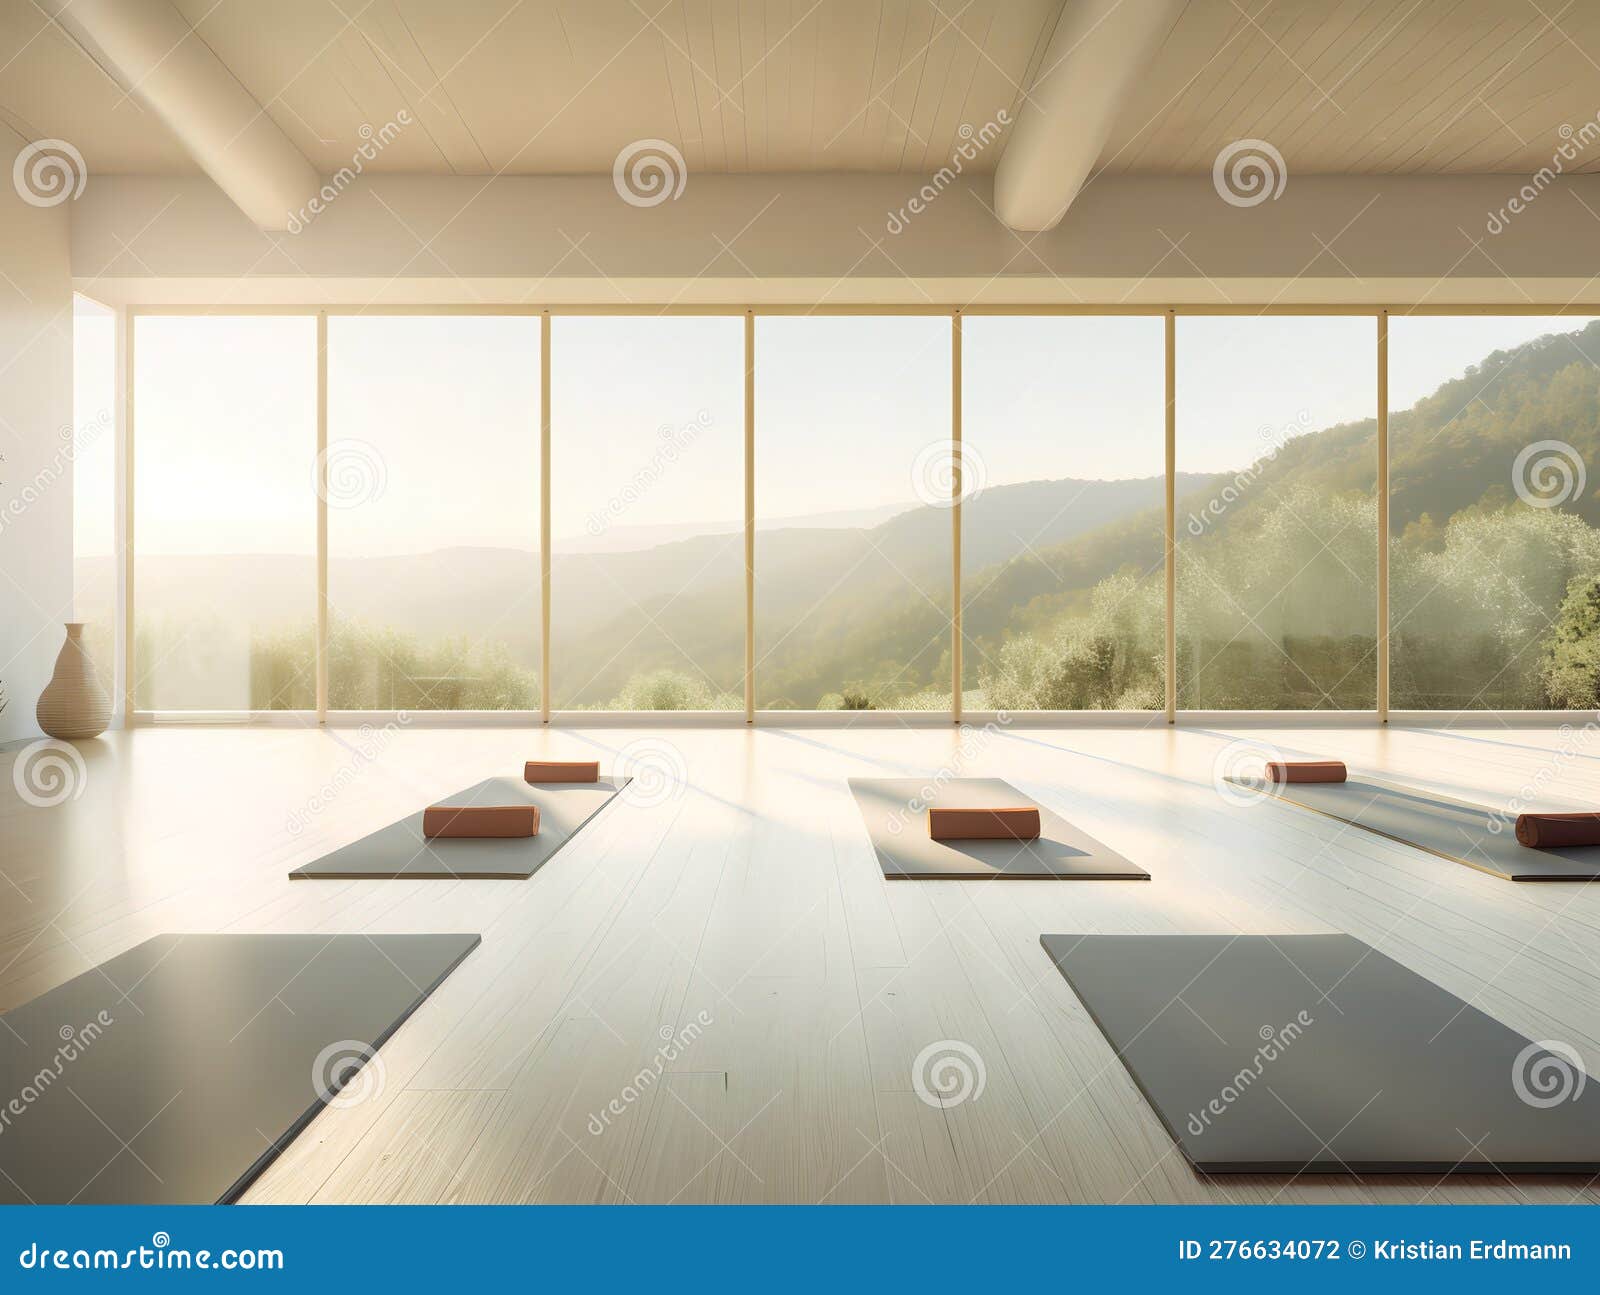 Empty Zen Room Or Yoga Studio With Nature View From Window And